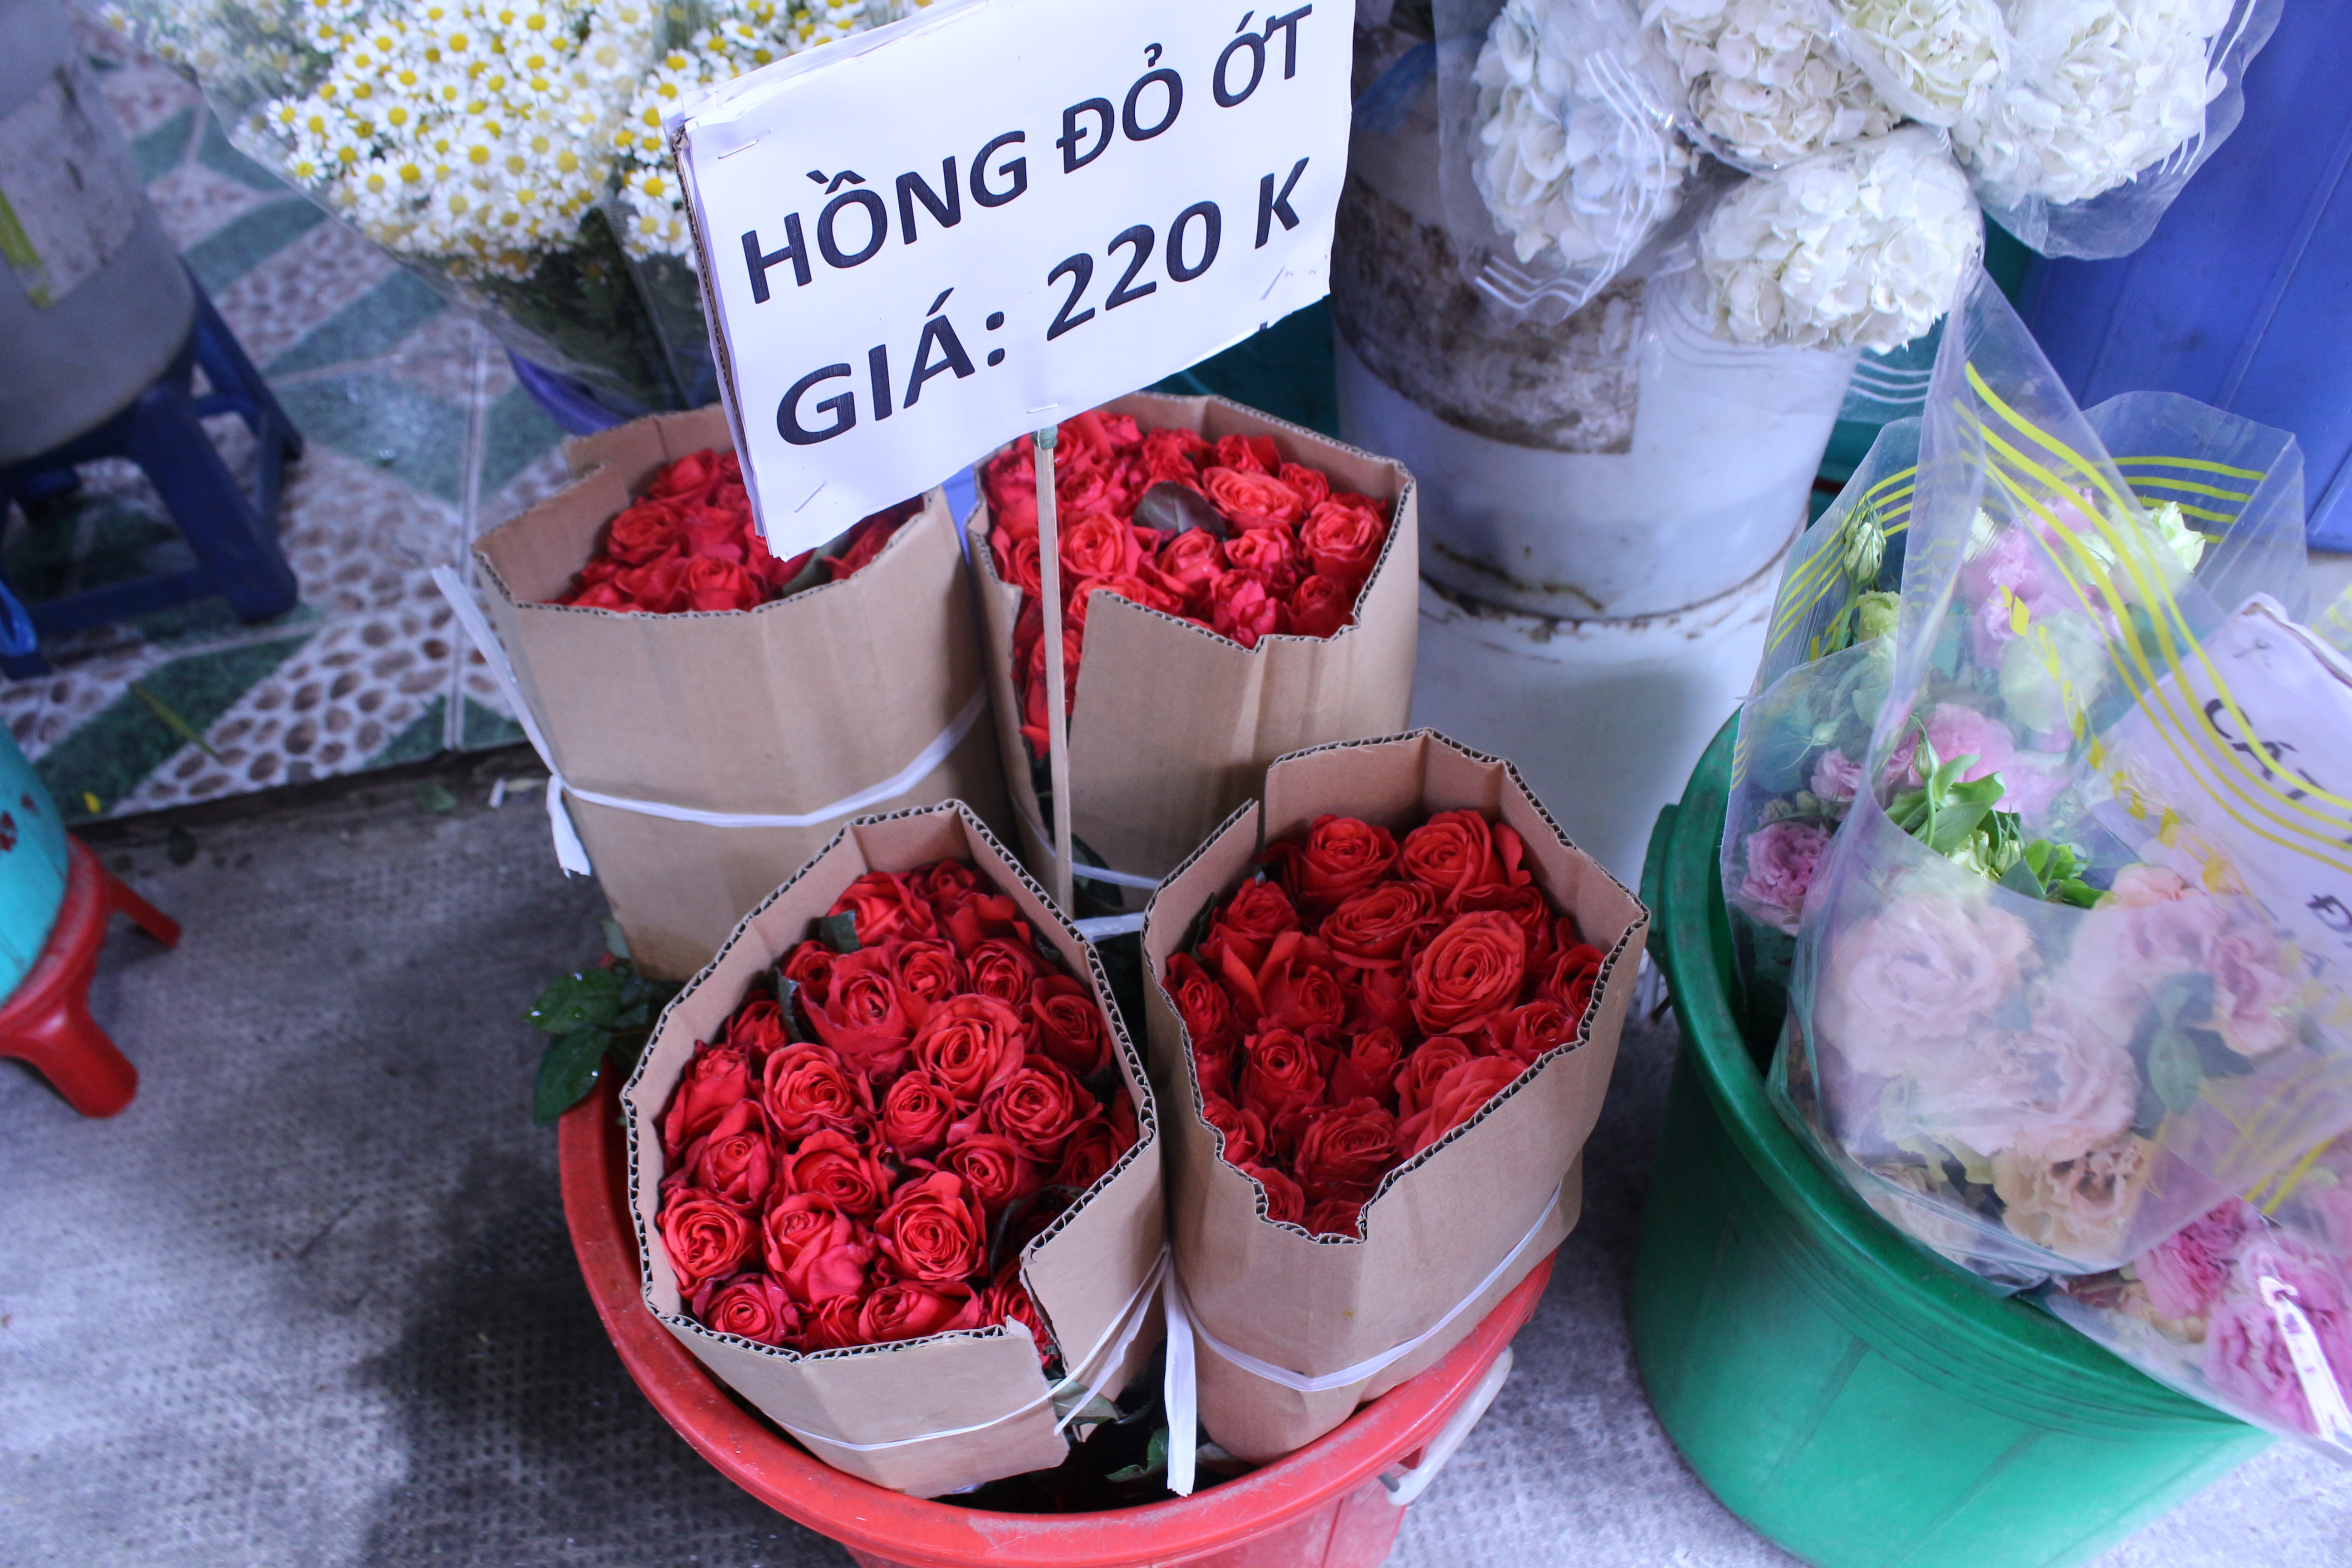 Roses are sold at Ho Thi Ky Market in District 10, Ho Chi Minh City. Photo: Ray Kuschert / Tuoi Tre News